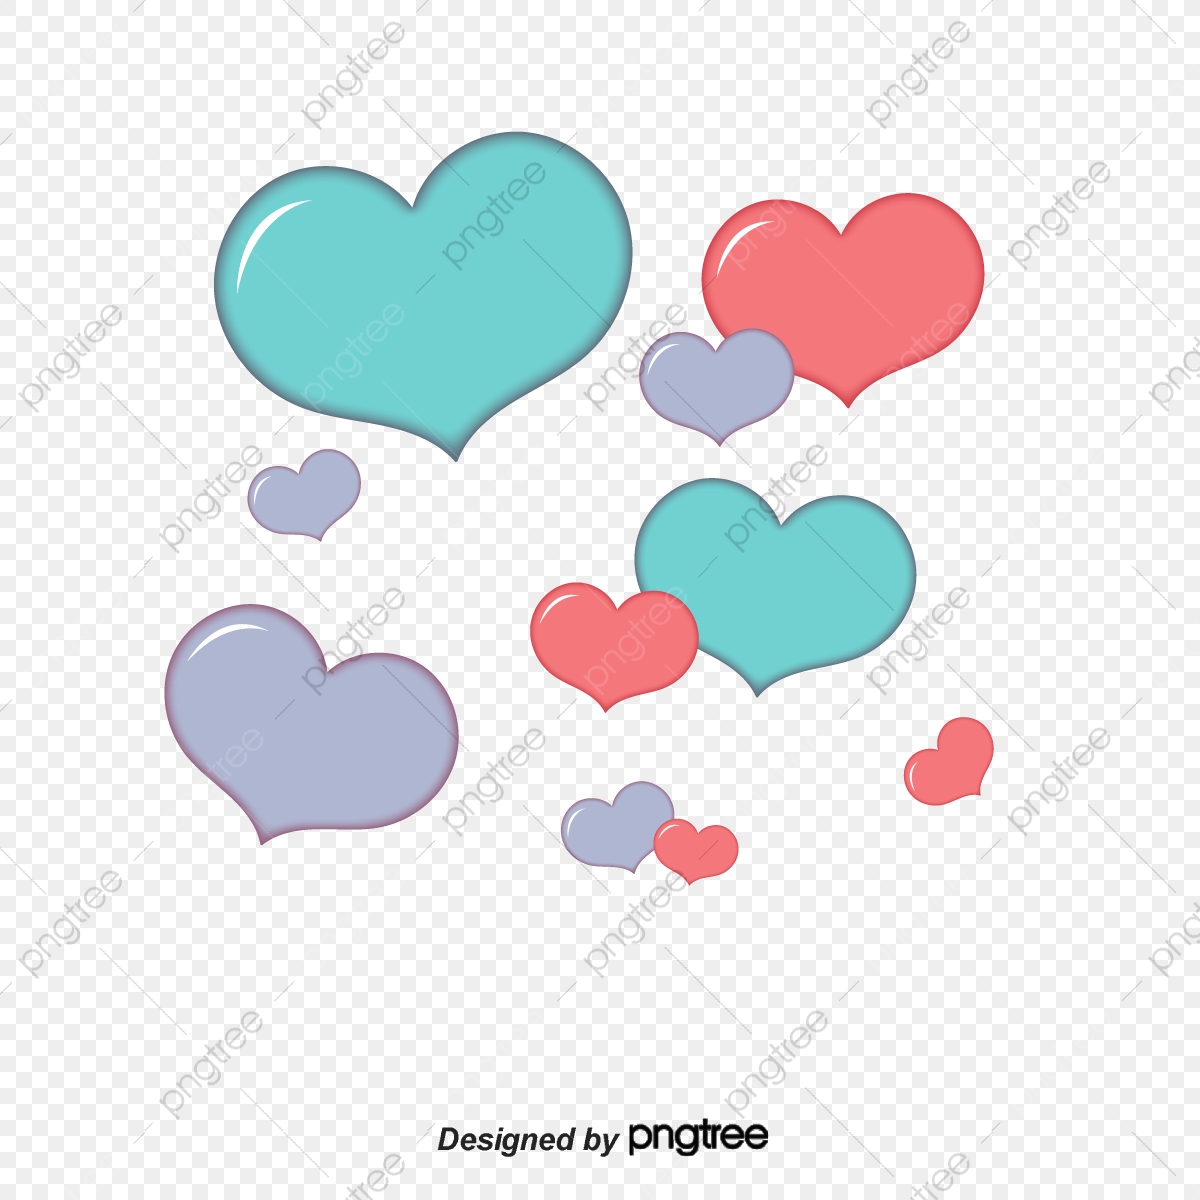 A Double Headed Frame, Frame Clipart, Two Hearts, An Arrow PNG.